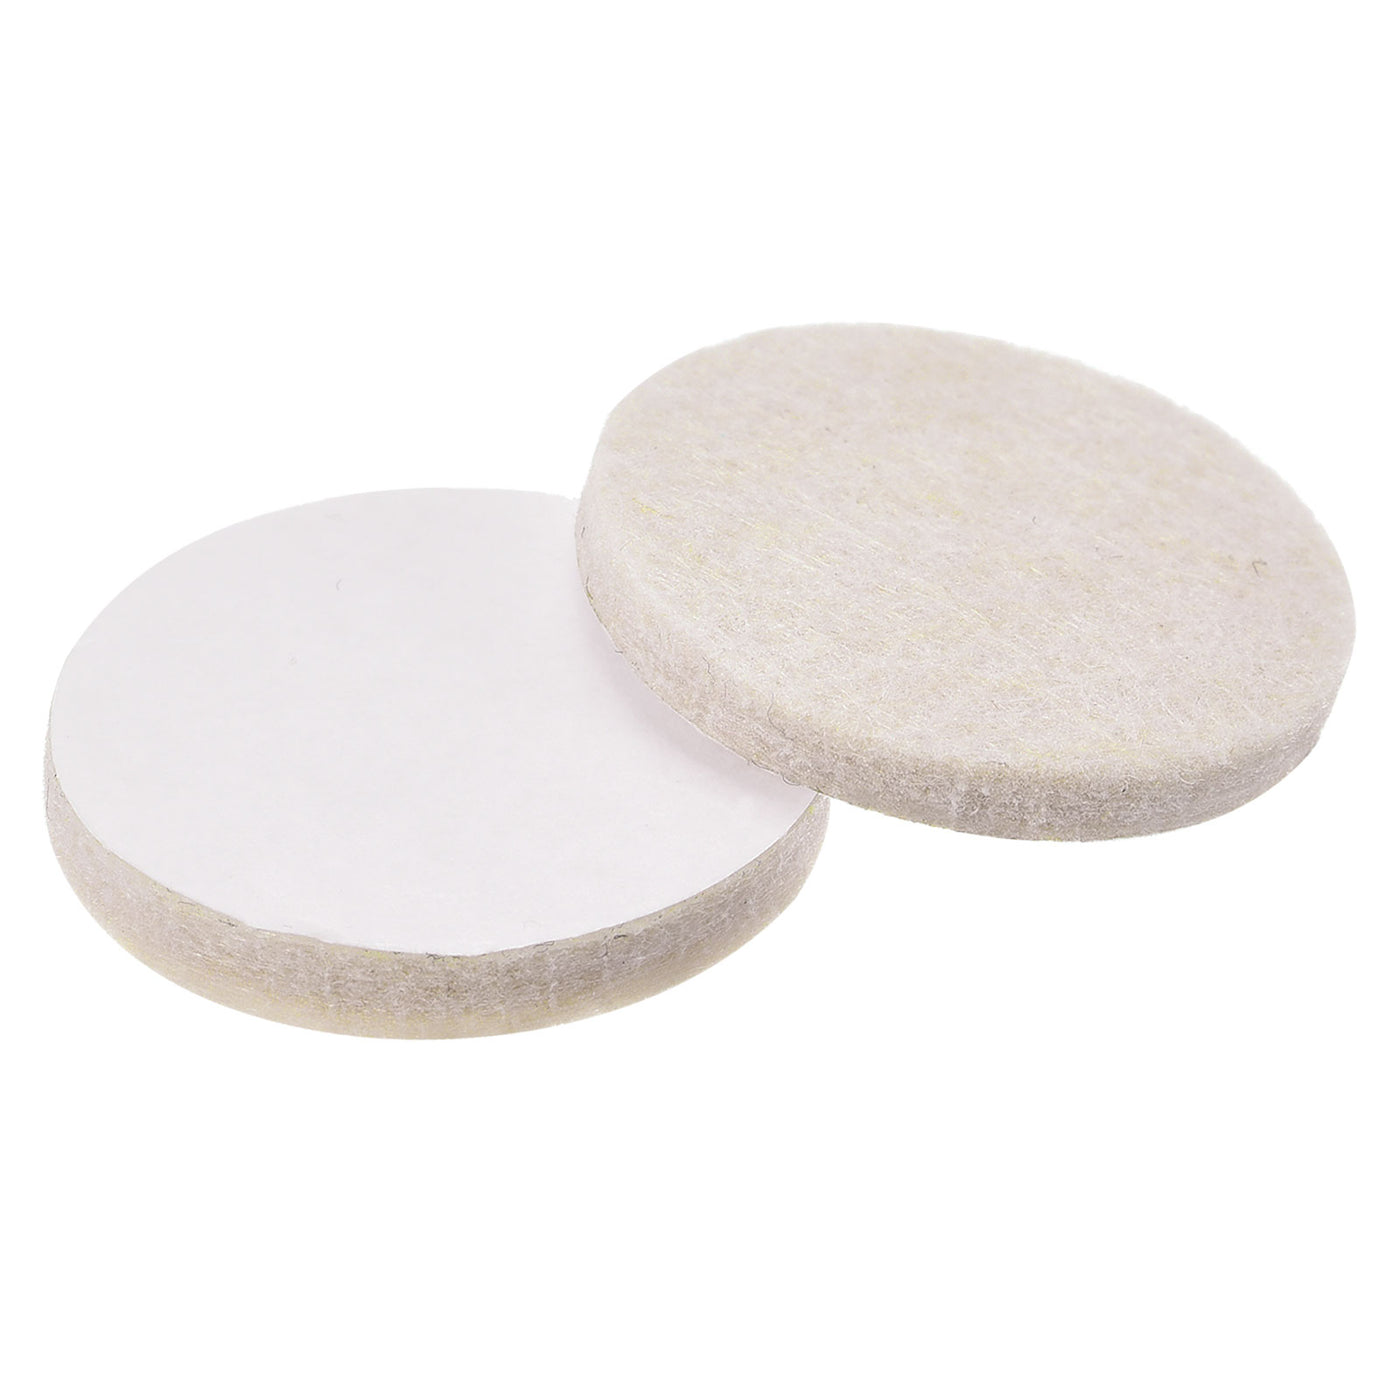 uxcell Uxcell Felt Furniture Pads, Self-stick Non-slip Anti-scratch Round Felt Pads for Table Tops